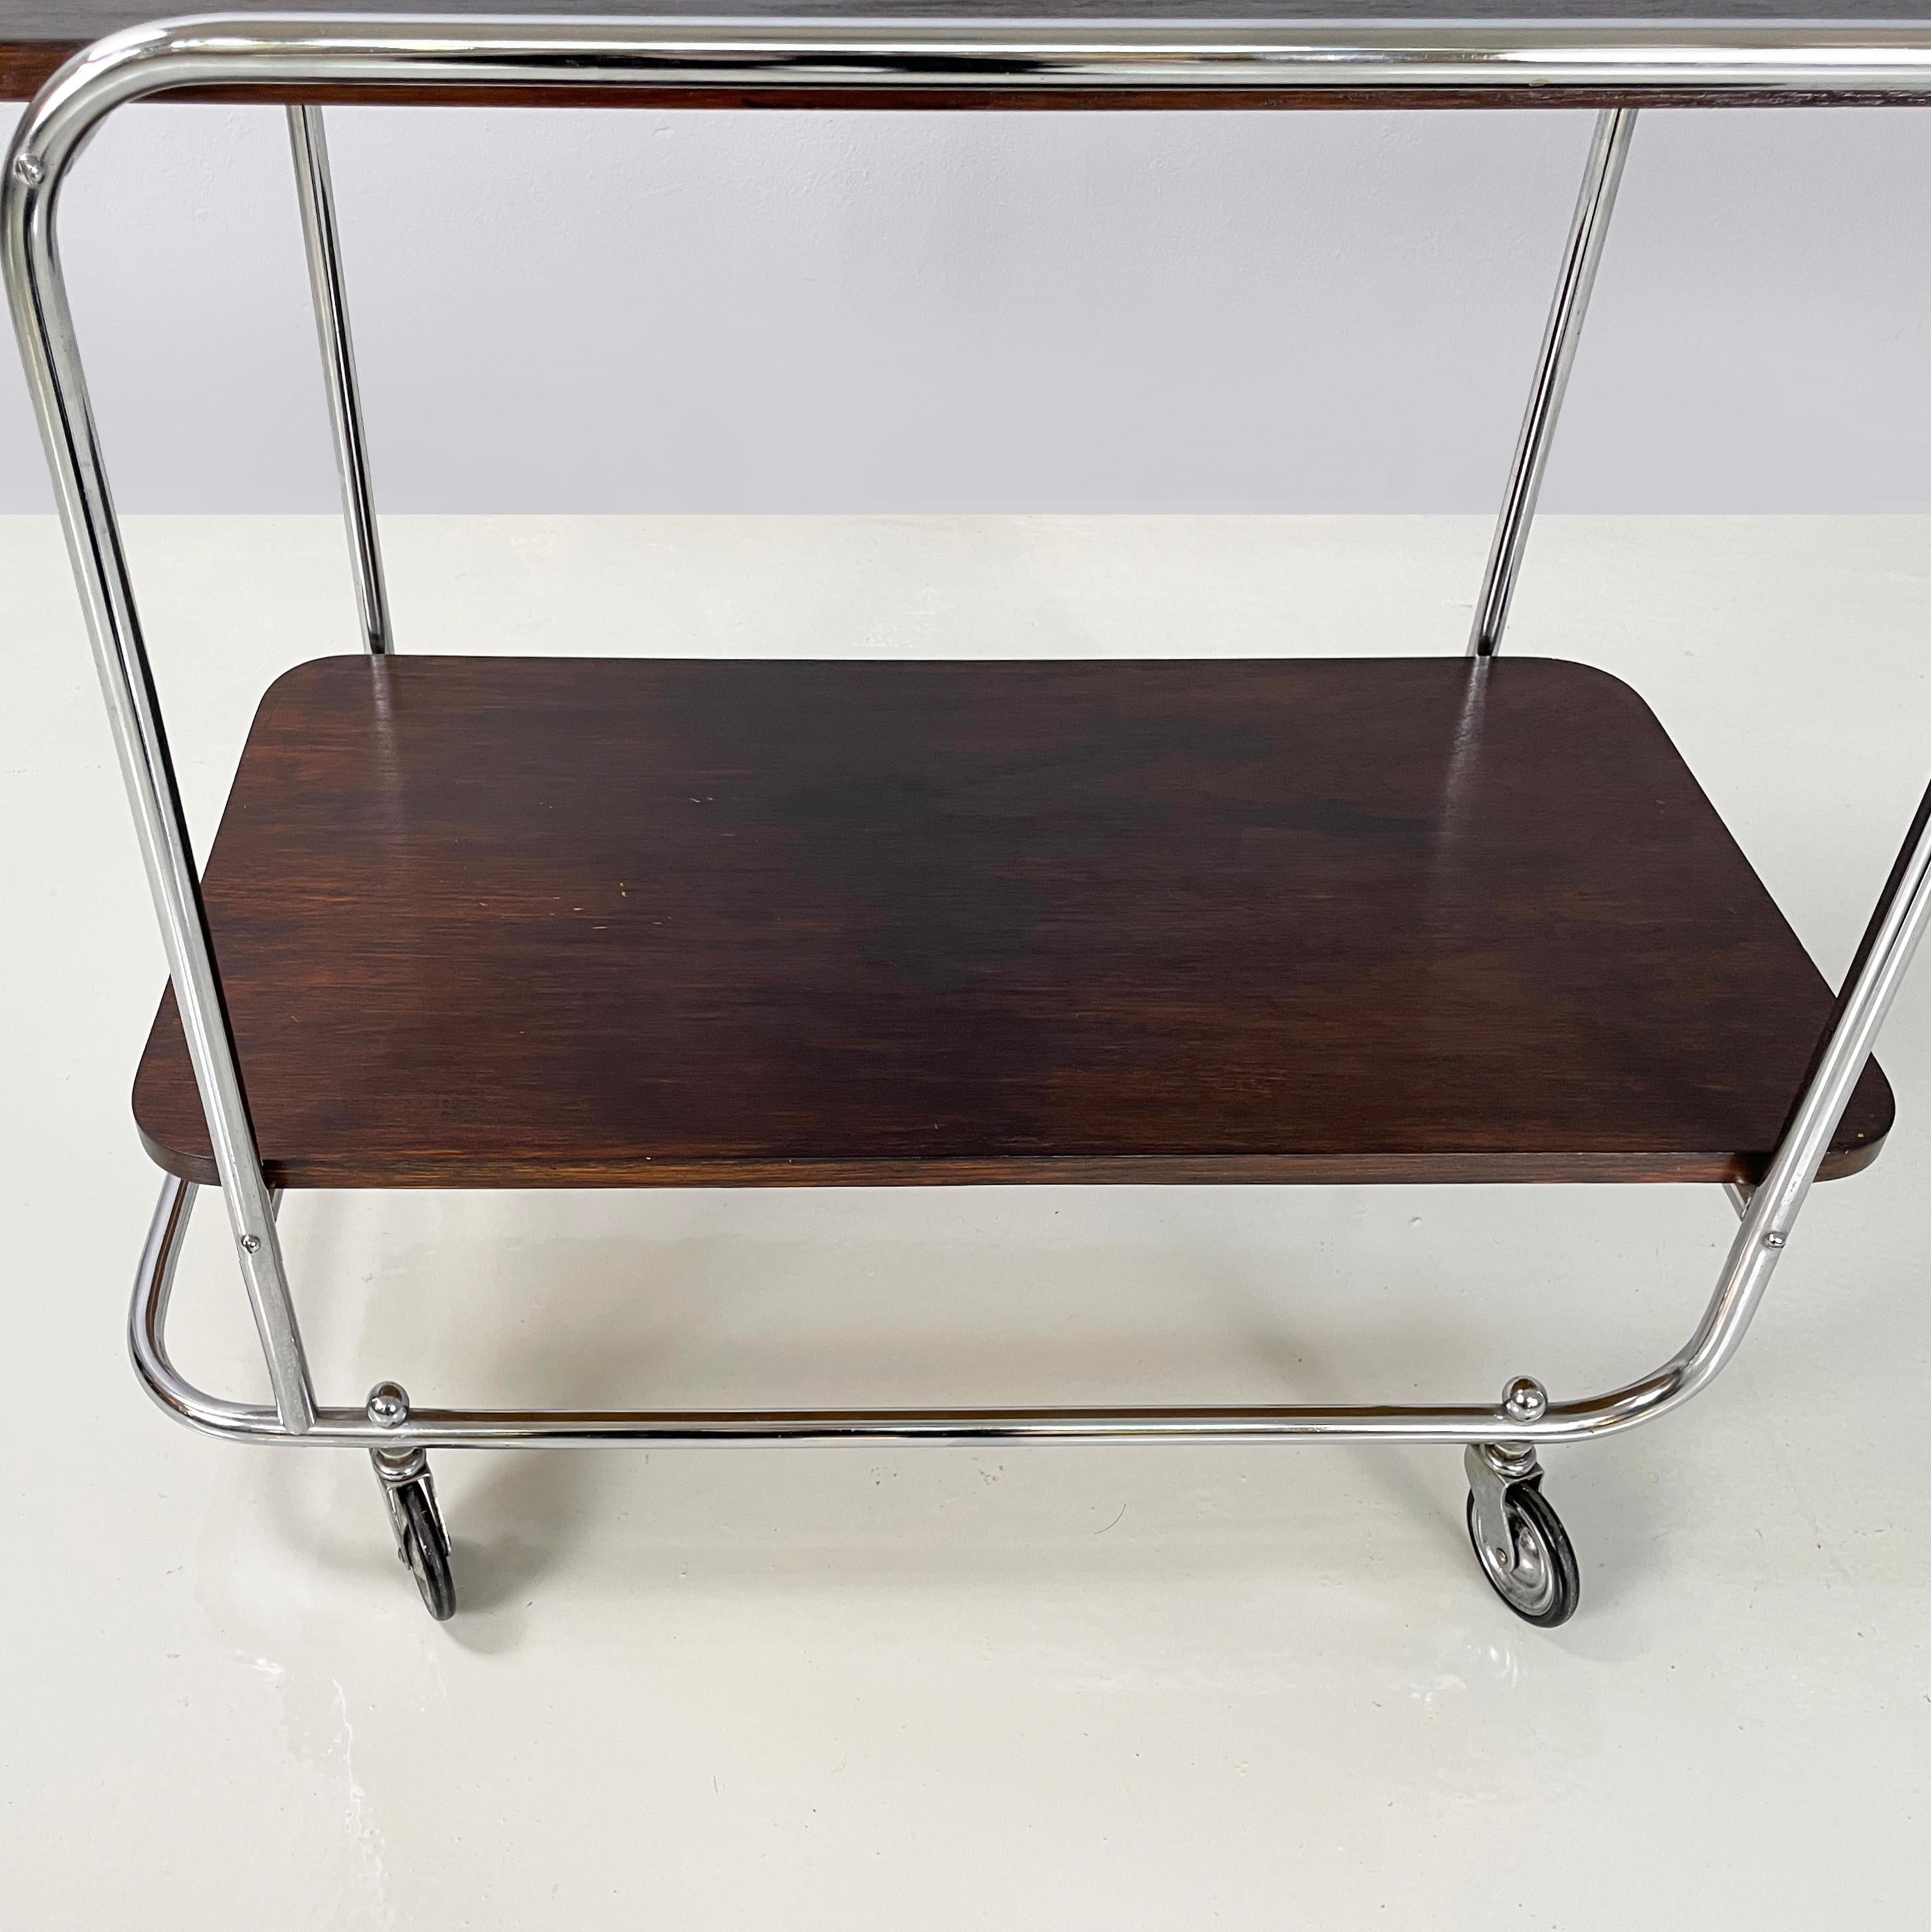 Italian mid-century modern Wood and metal cart with double shelf, 1940s For Sale 6